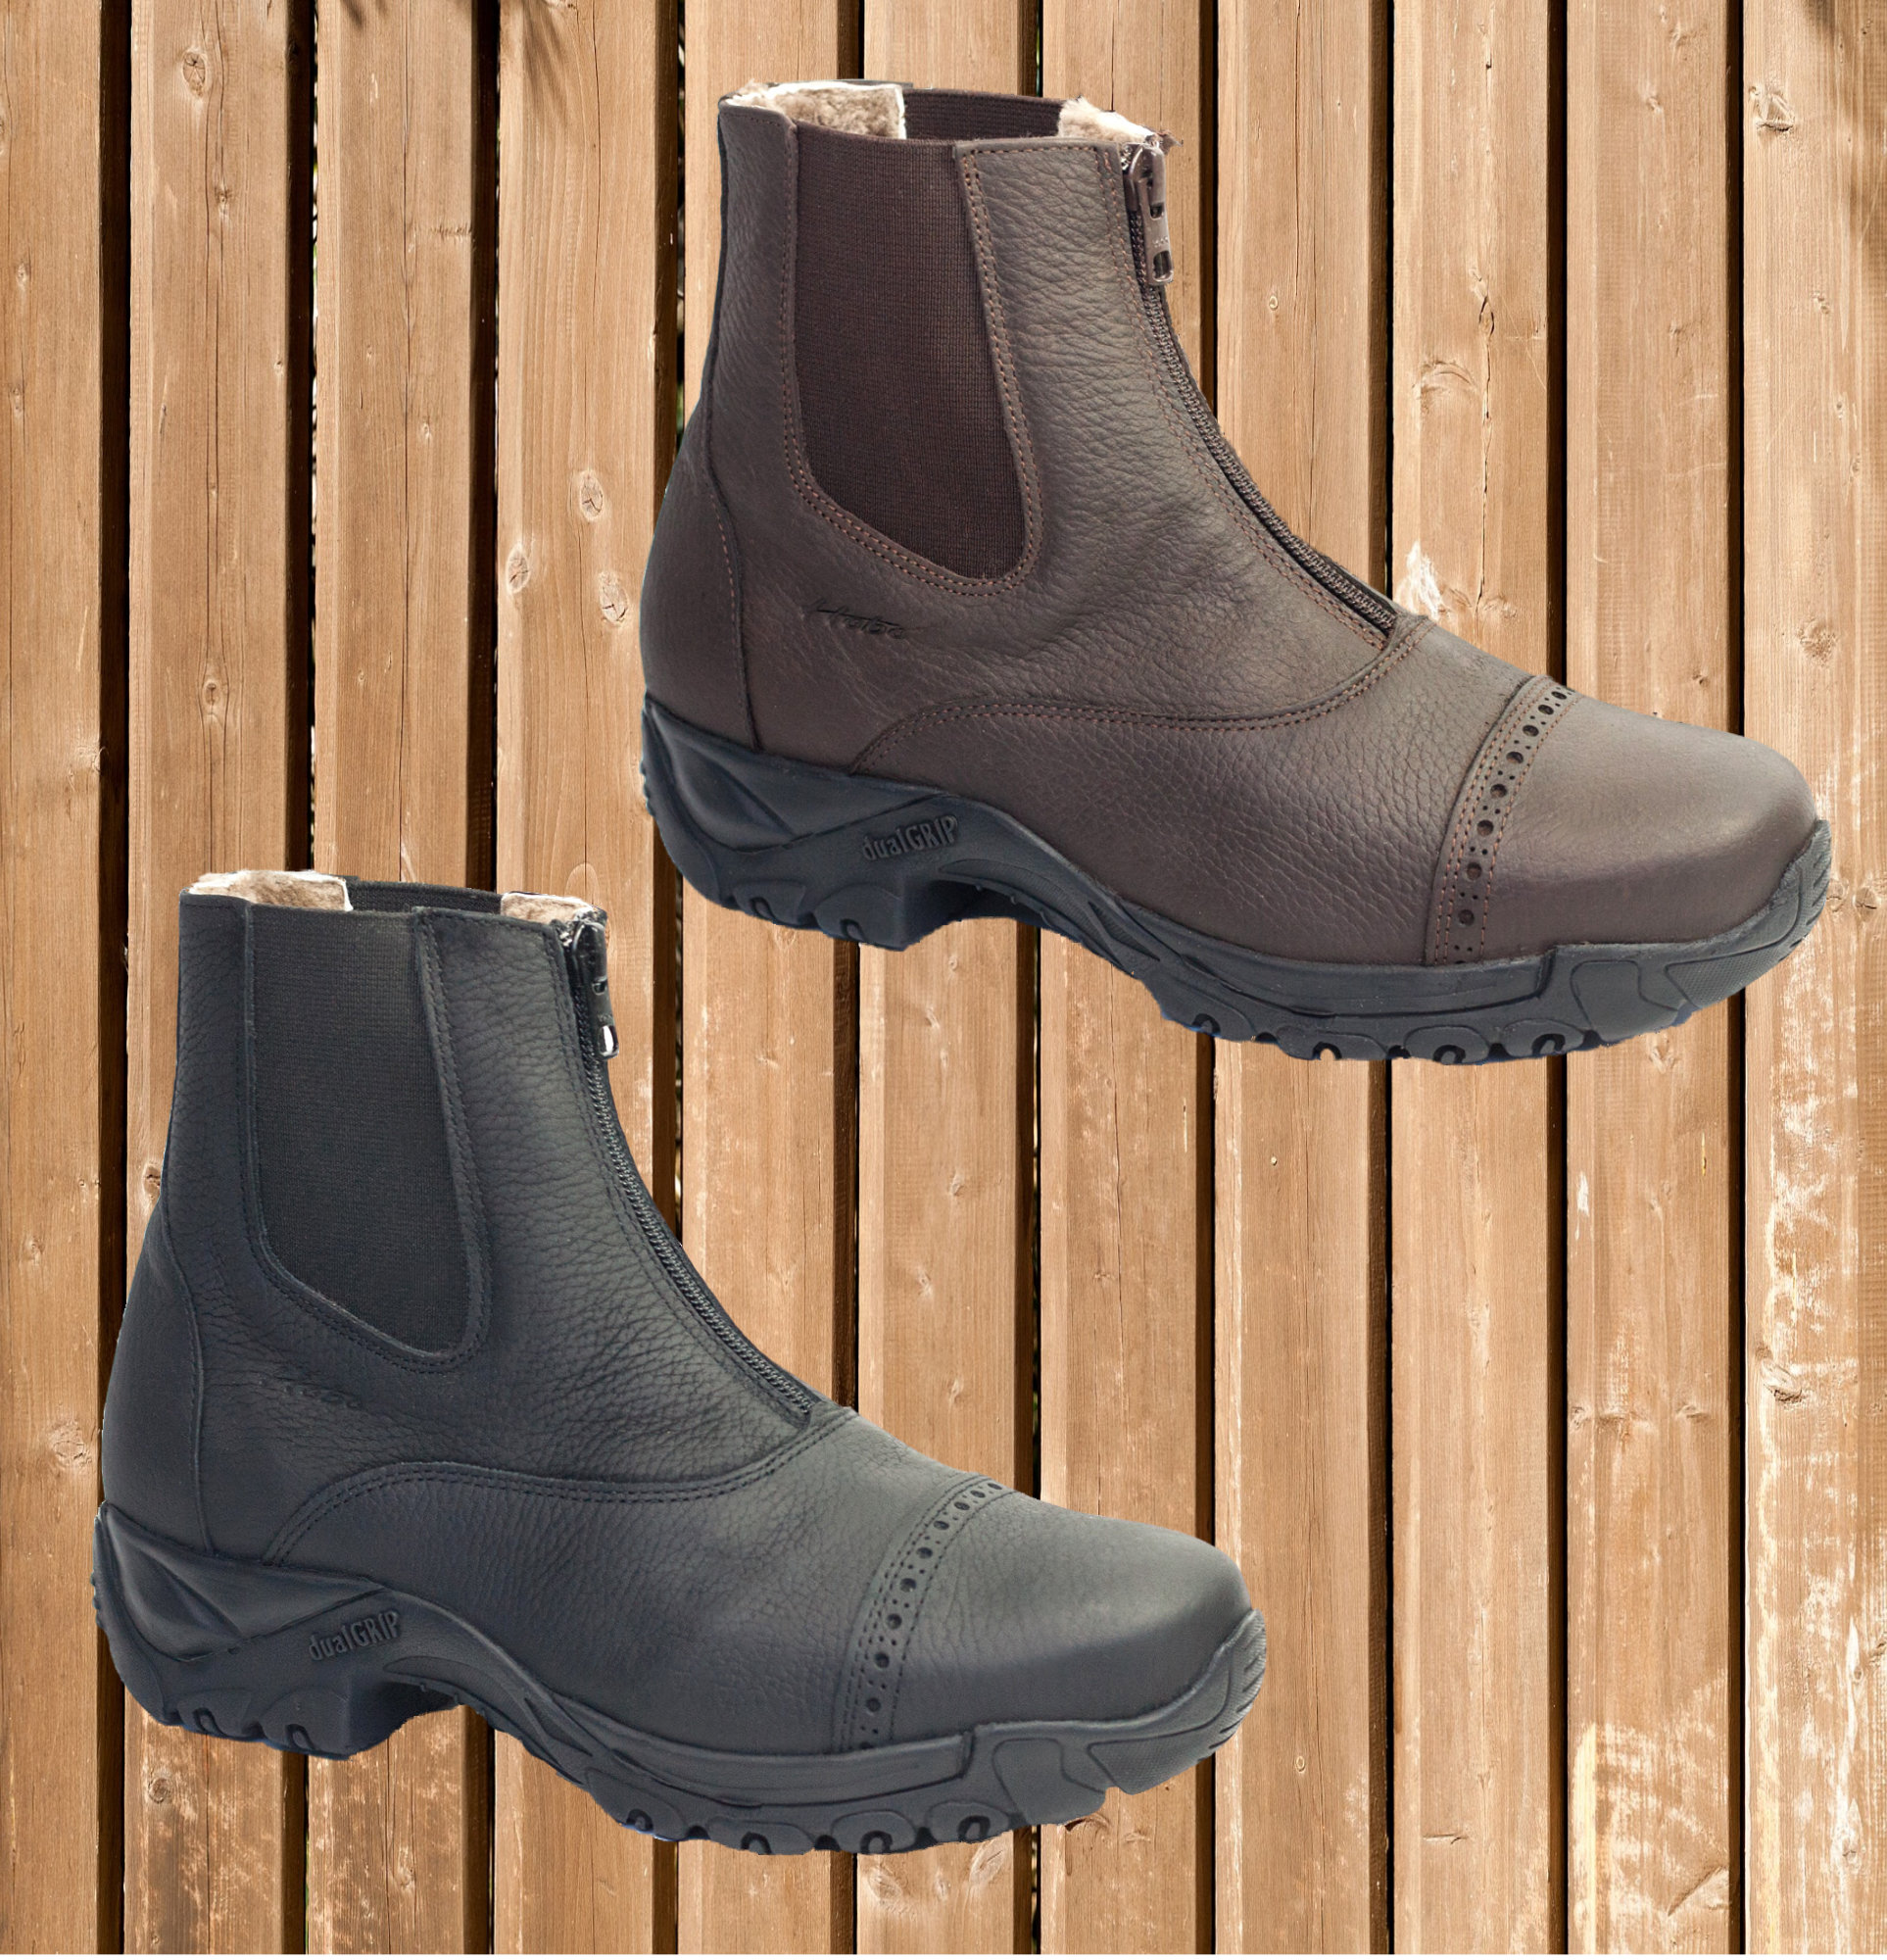 Hobo HOT BOB, Thermostiefelette, echtes Lammfell